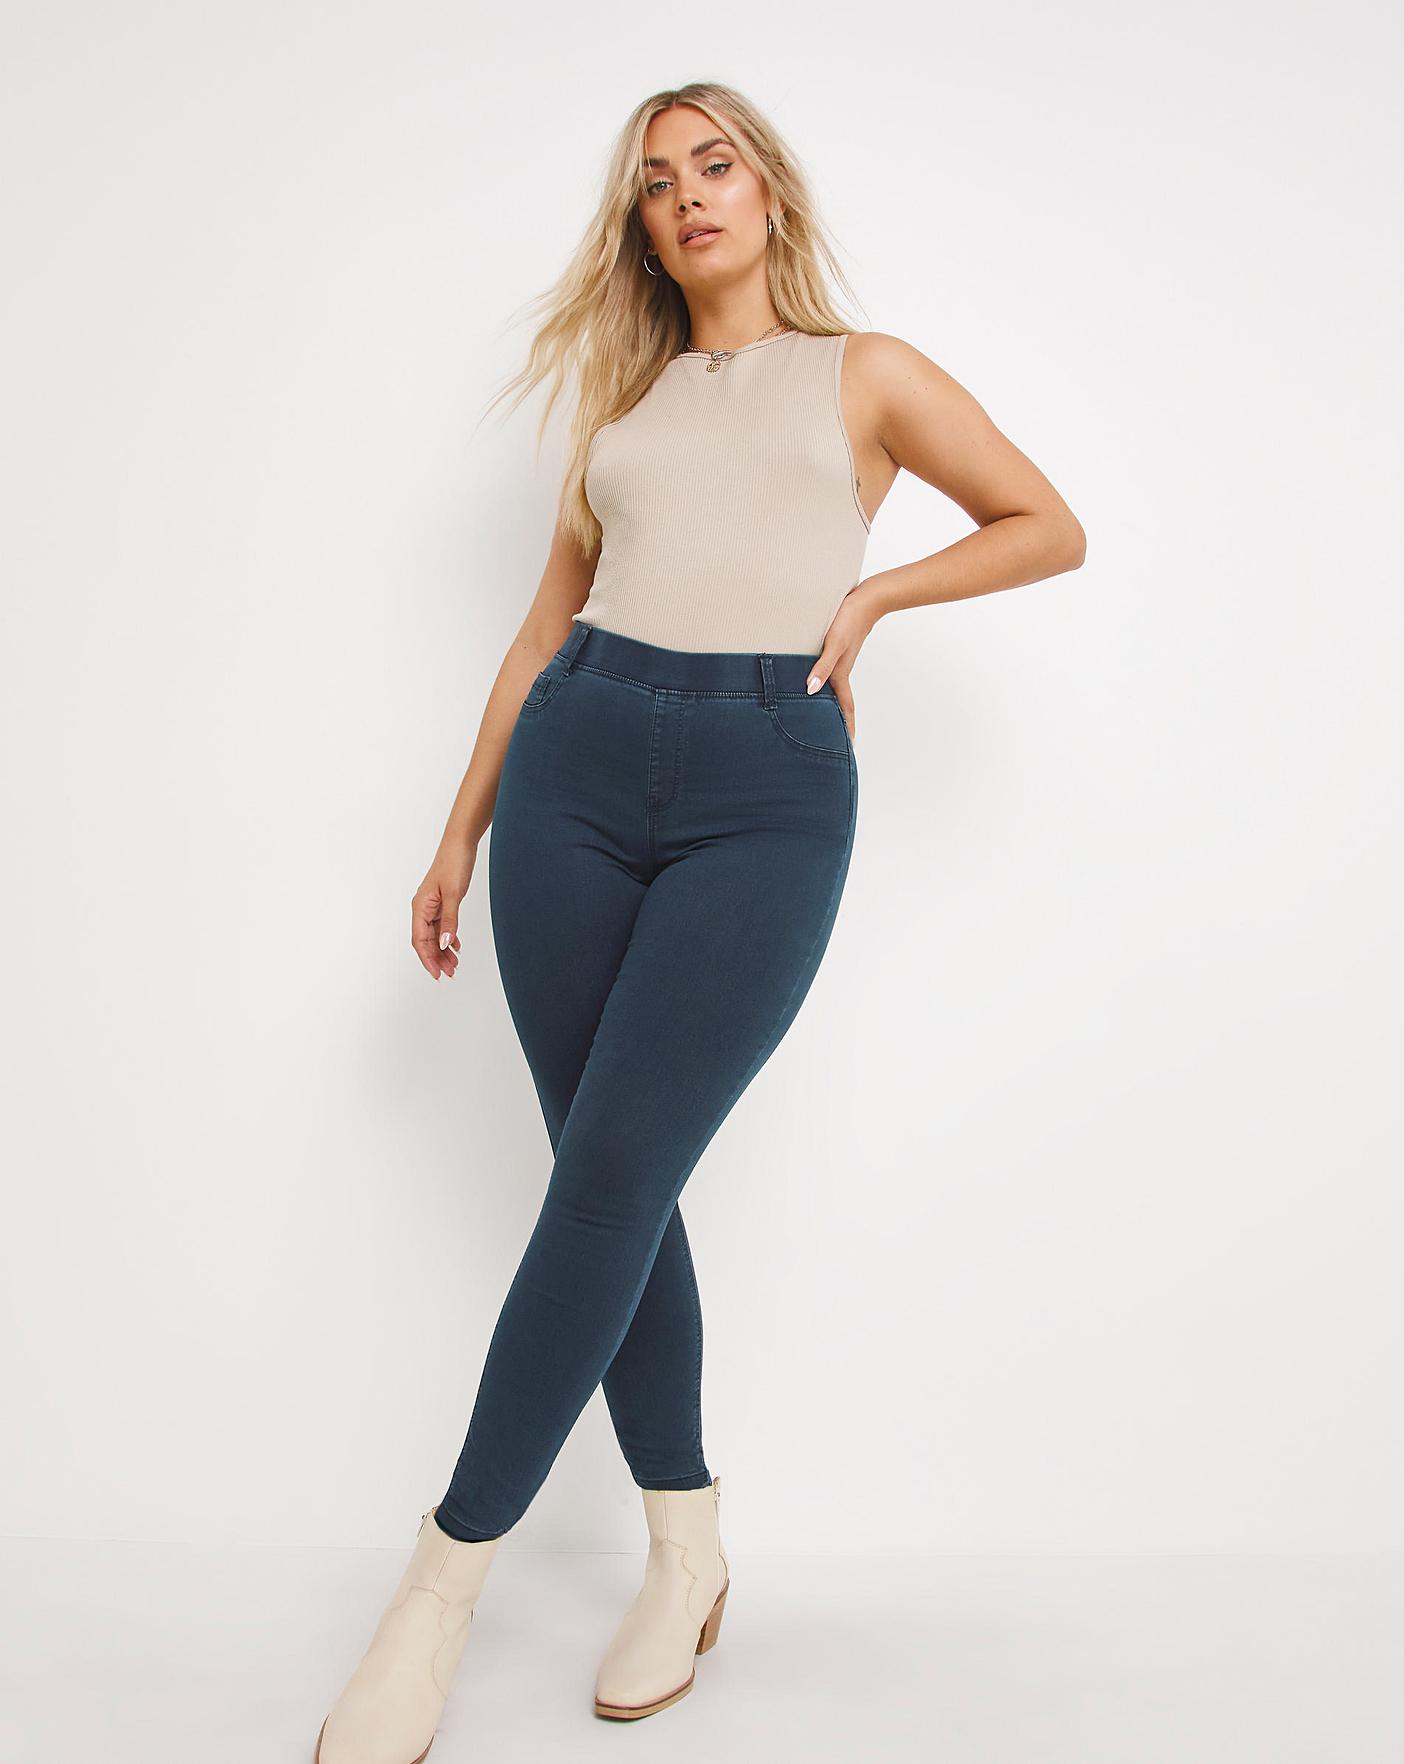 Women Jeggings: The Wardrobe Game-Changer Every Woman Needs